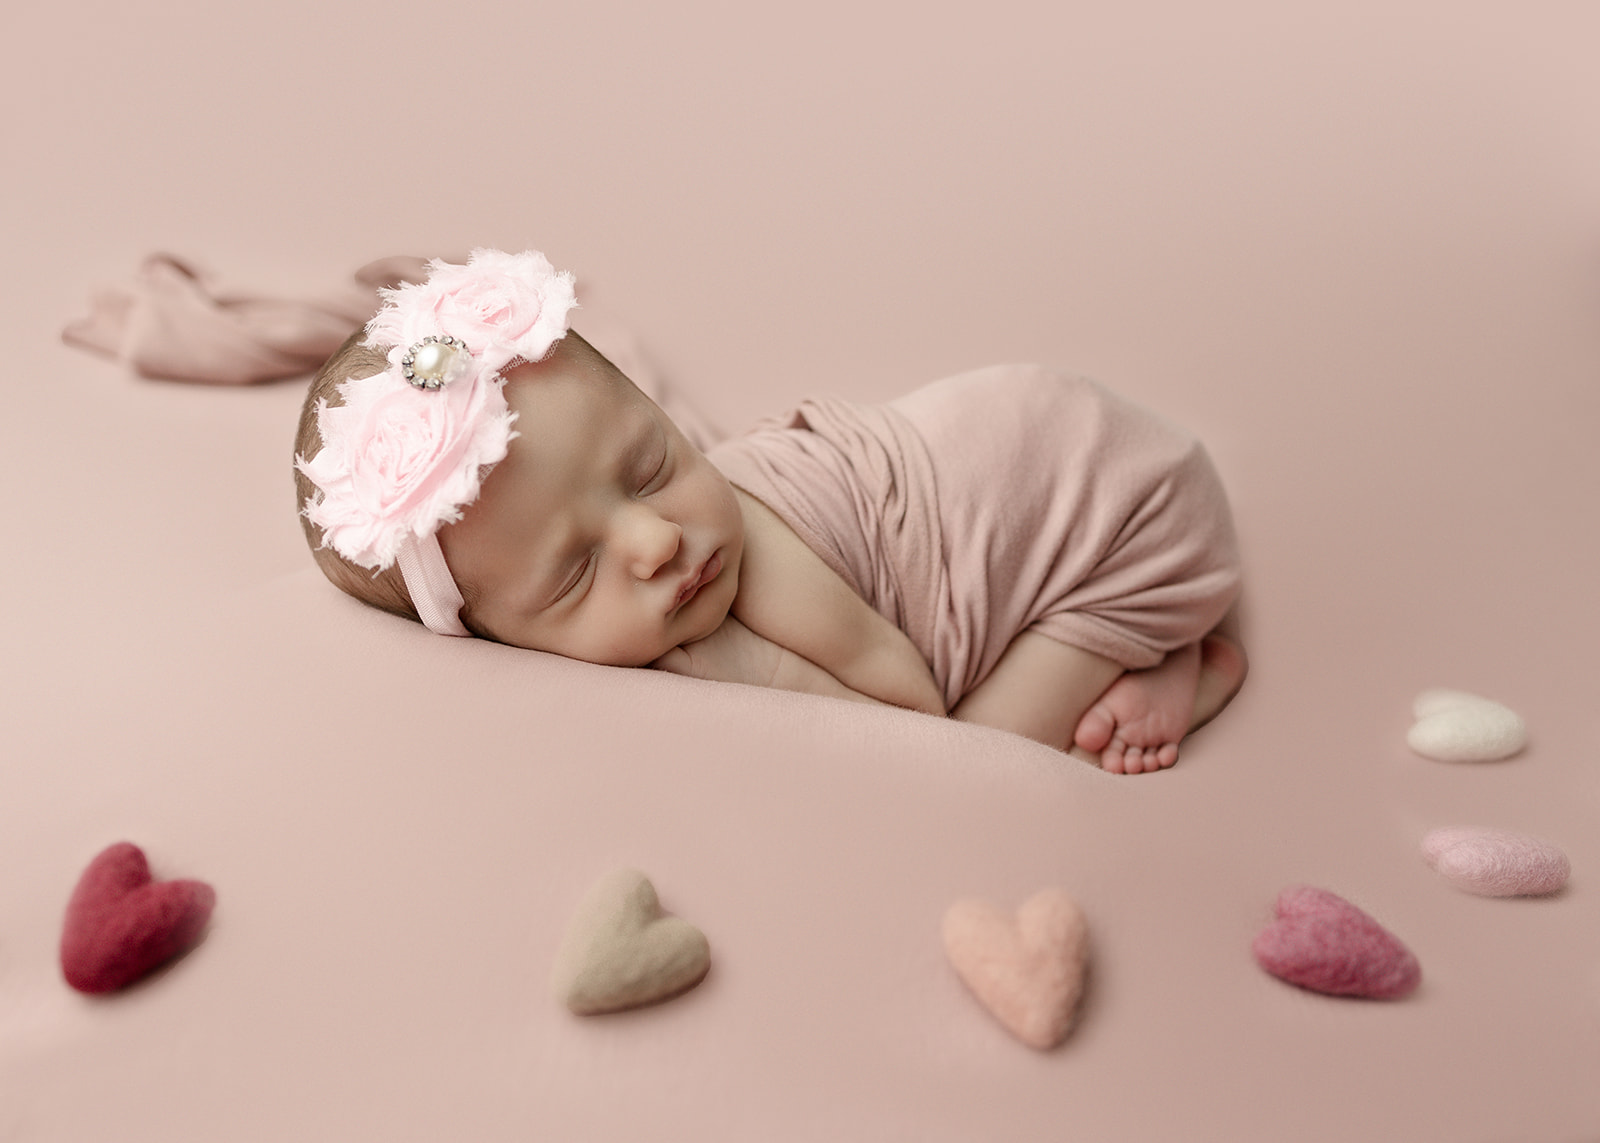 A newborn baby sleeps in a pink headband and swaddle while surrounded by felt hearts Huntington Beach Pediatricians